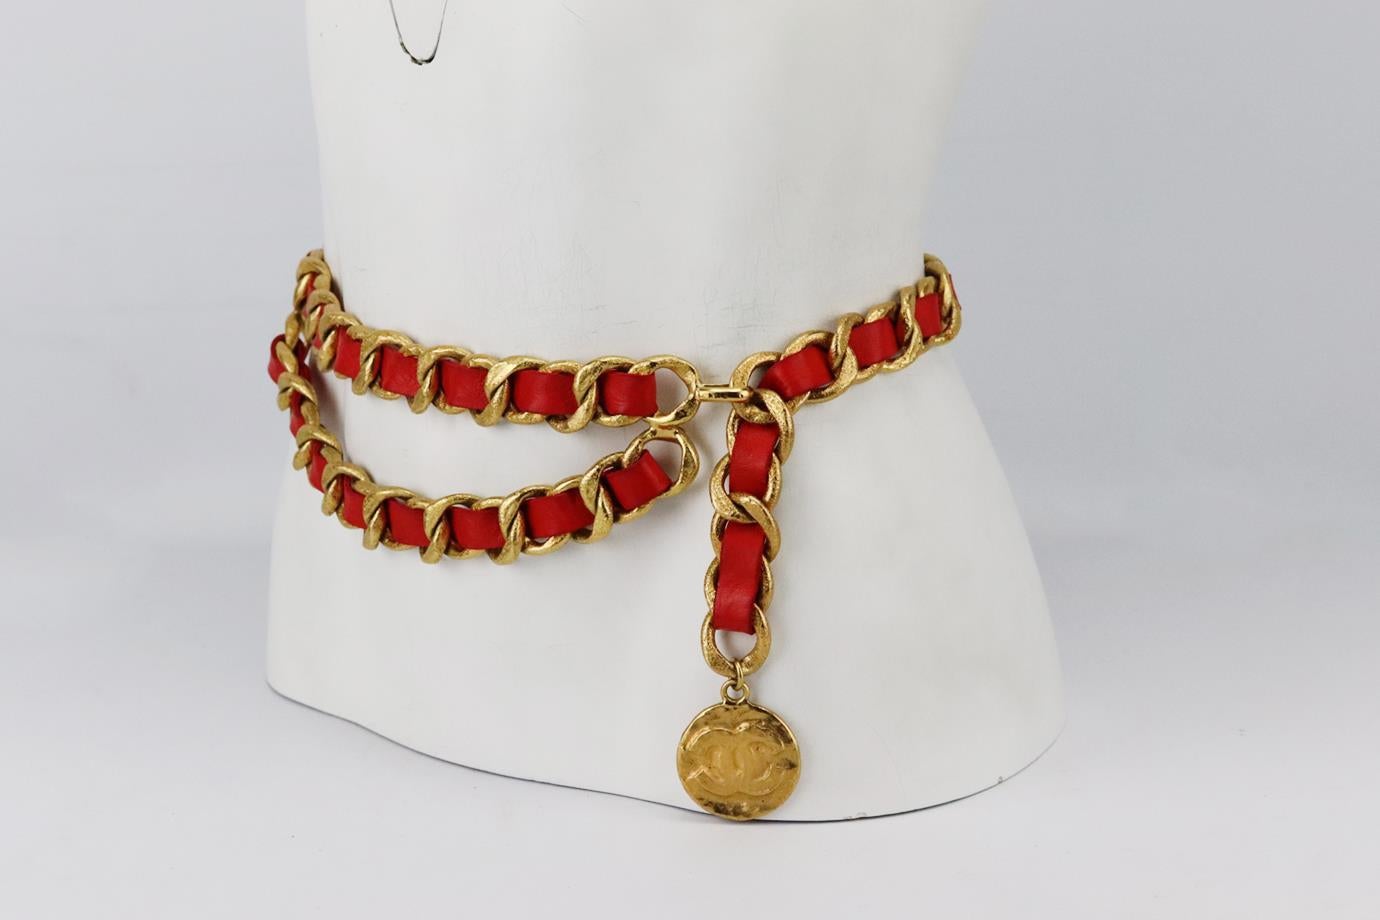 Chanel Vintage 1994 leather trimmed chain waist belt. Made from soft red leather interlinked with a mottled thick gold-tone chain and medallion detail at the front. Red. Hook fastening at front. Size: L: 38 in. Width: 1 in